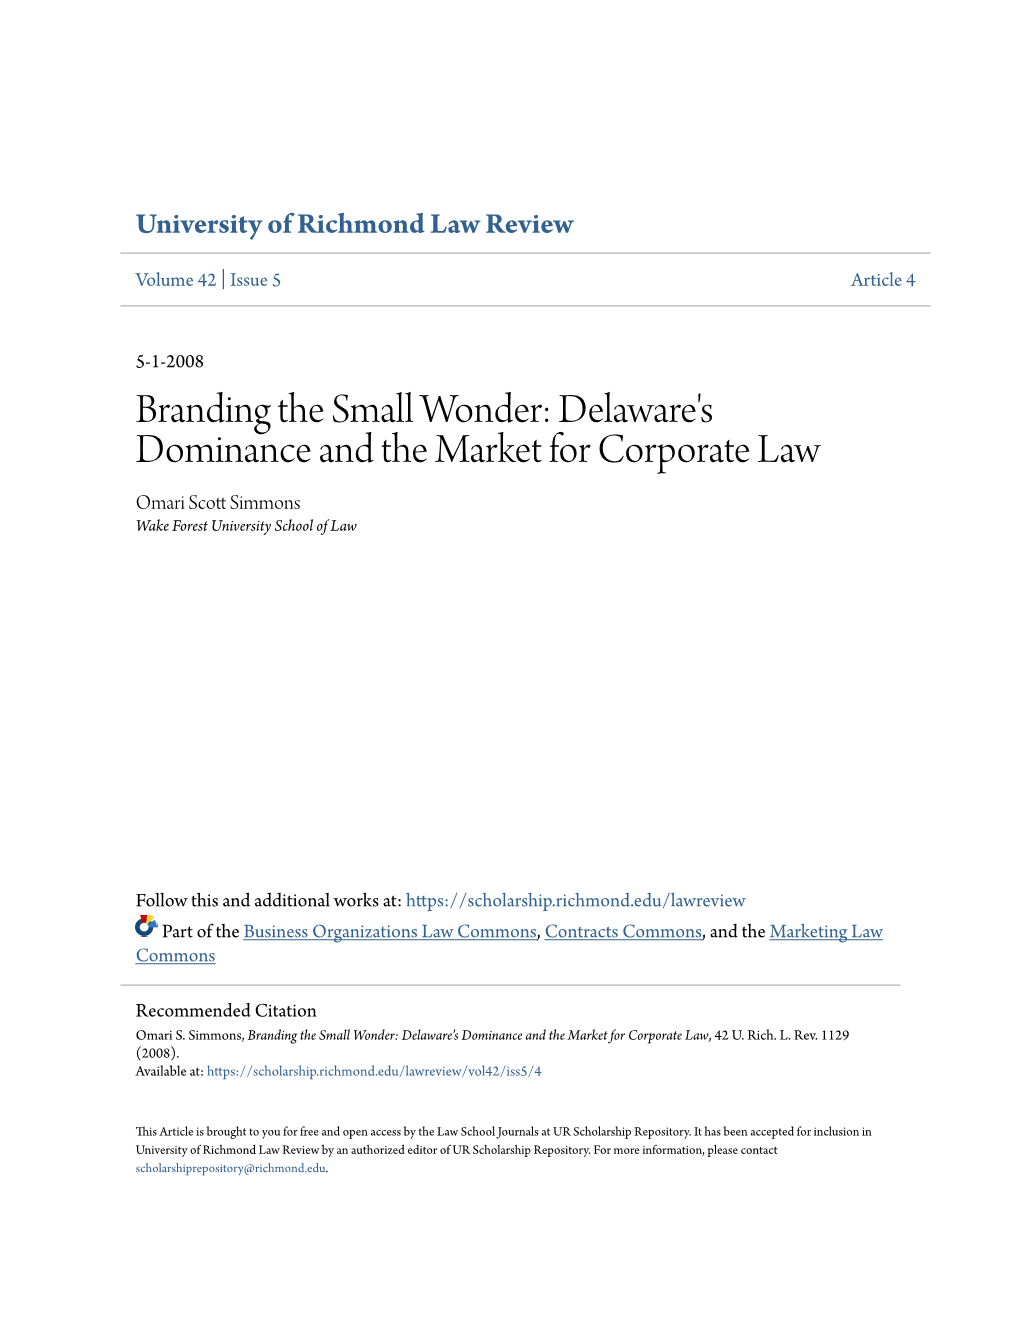 Branding the Small Wonder: Delaware's Dominance and the Market for Corporate Law Omari Scott Immonss Wake Forest University School of Law